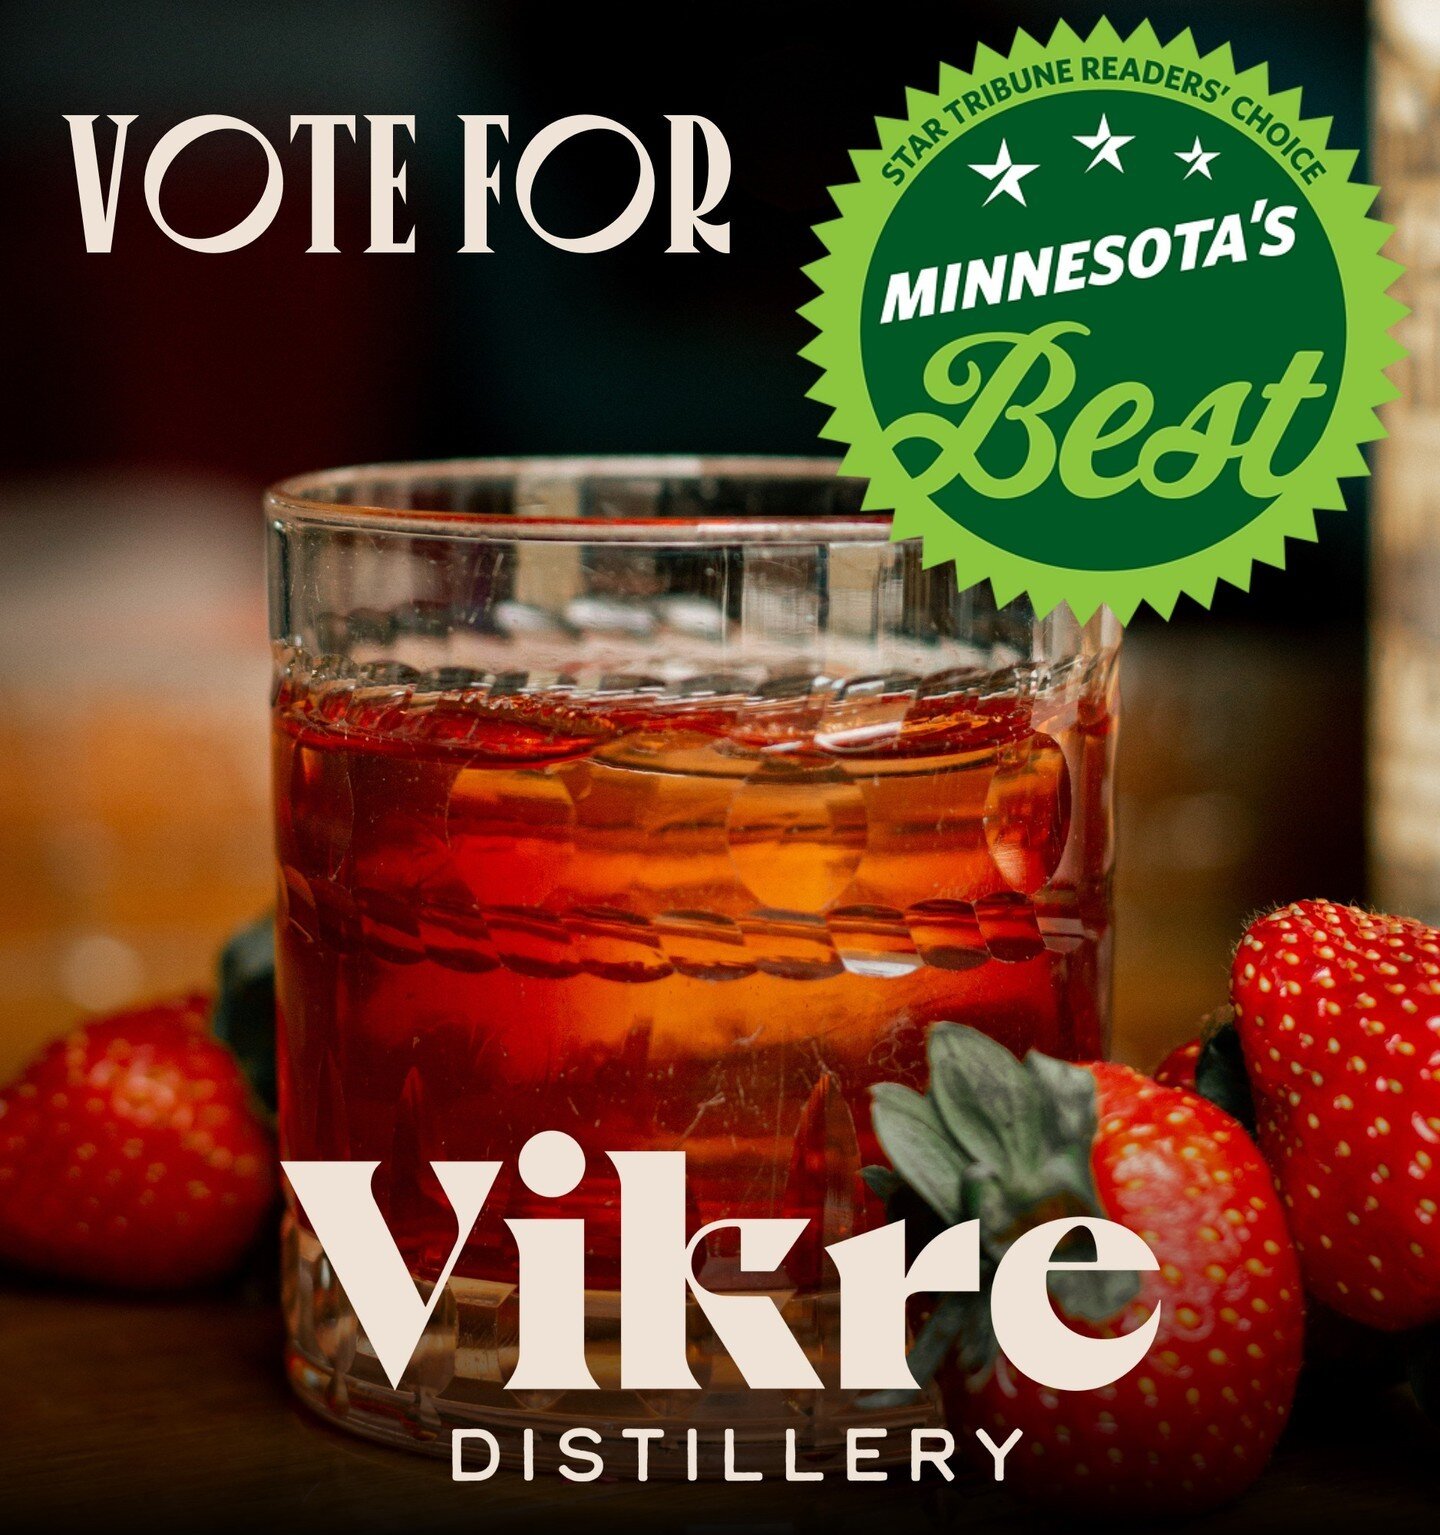 Hi friends!!!! We are here to let you know that we have - so kindly! - been nominated for a variety of categories in the Star Tribune's Minnesota's Best contest. The winner's are chosen entirely by voting, so if you're into what we are doing here, yo